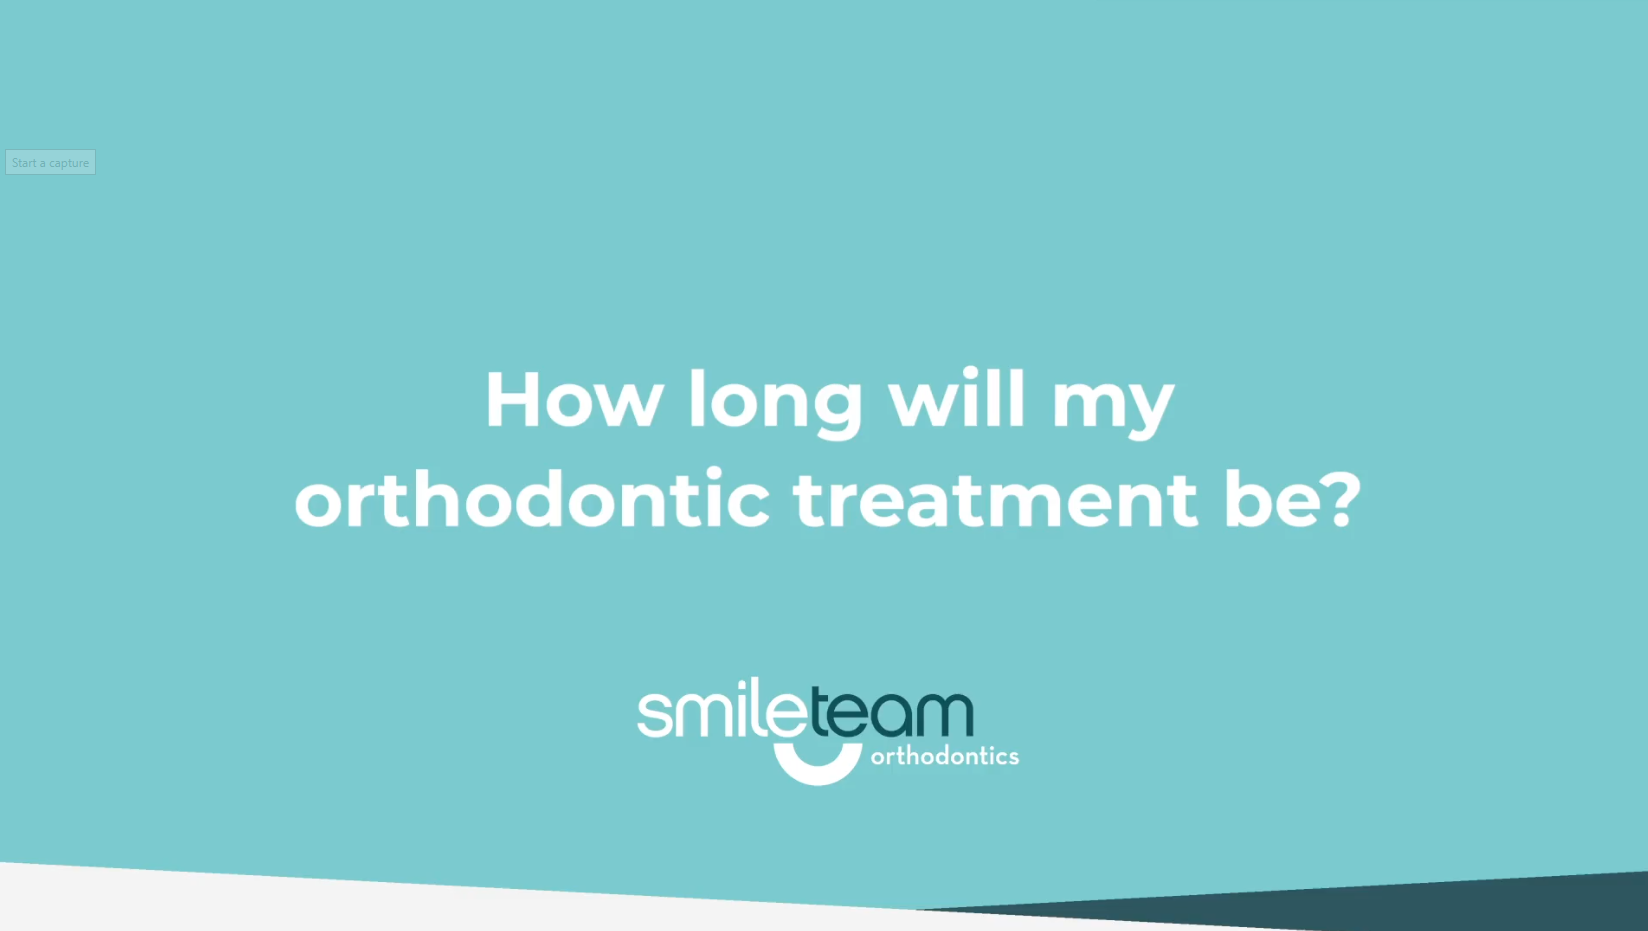 How long will my orthdontic treatment be?